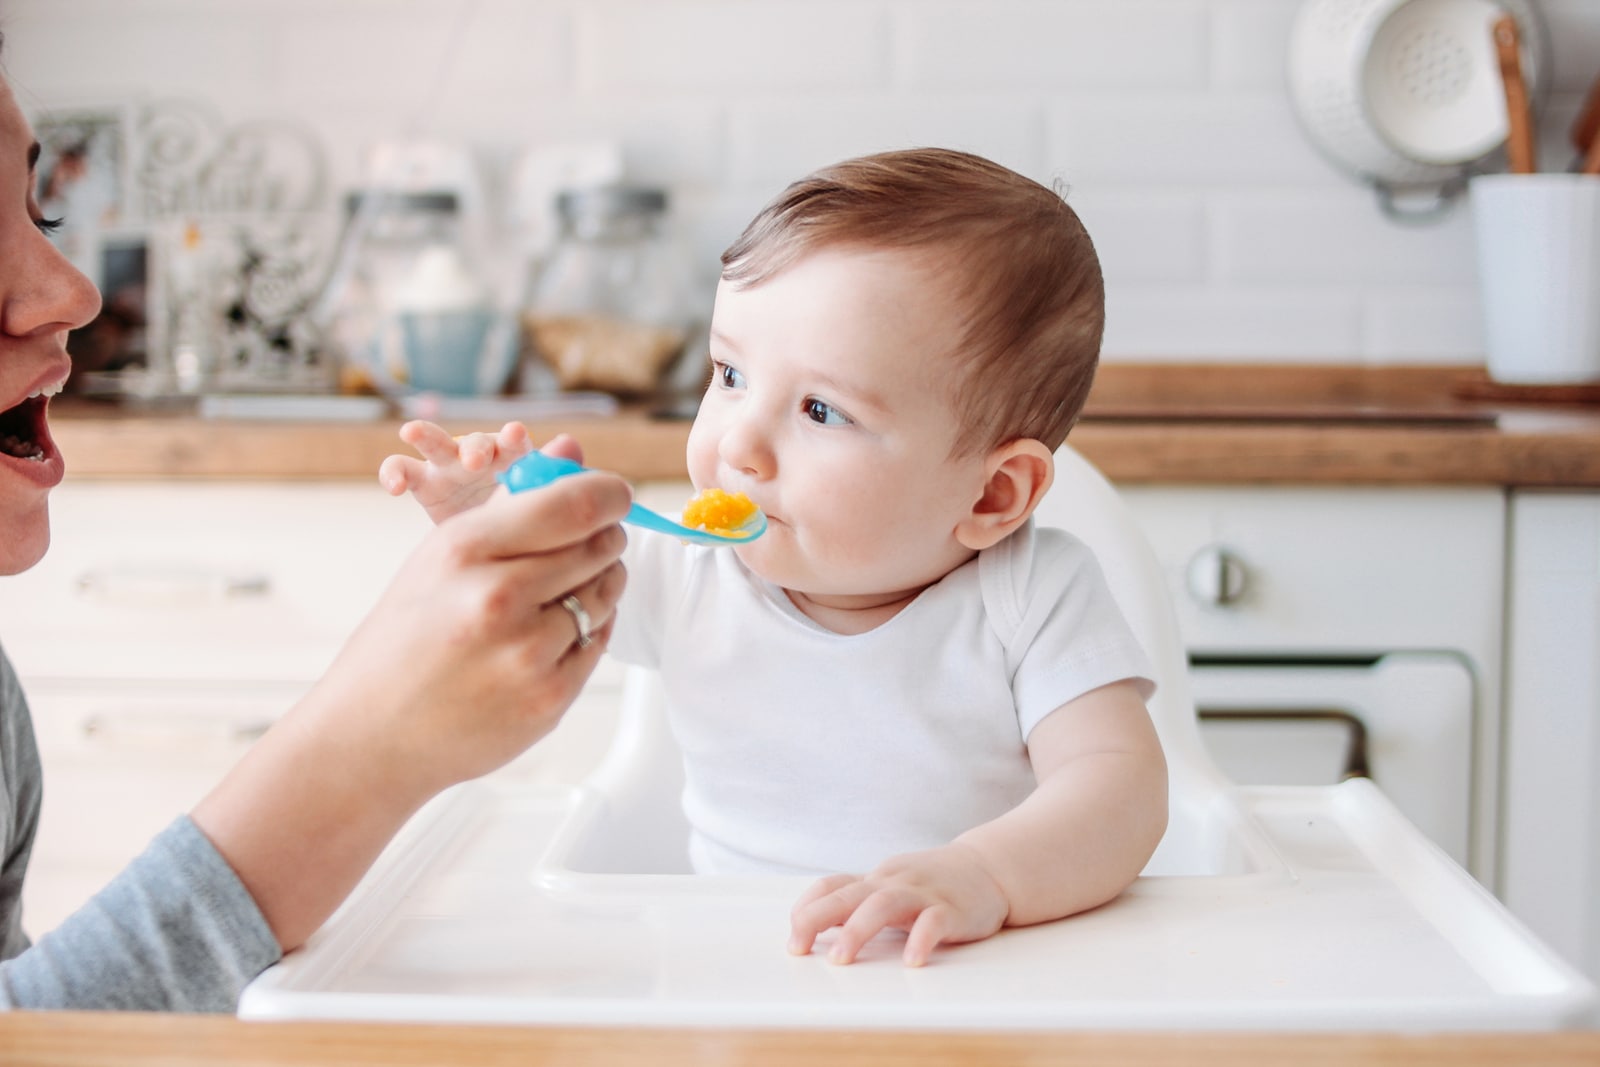 Tips for Buying Healthy Baby Food